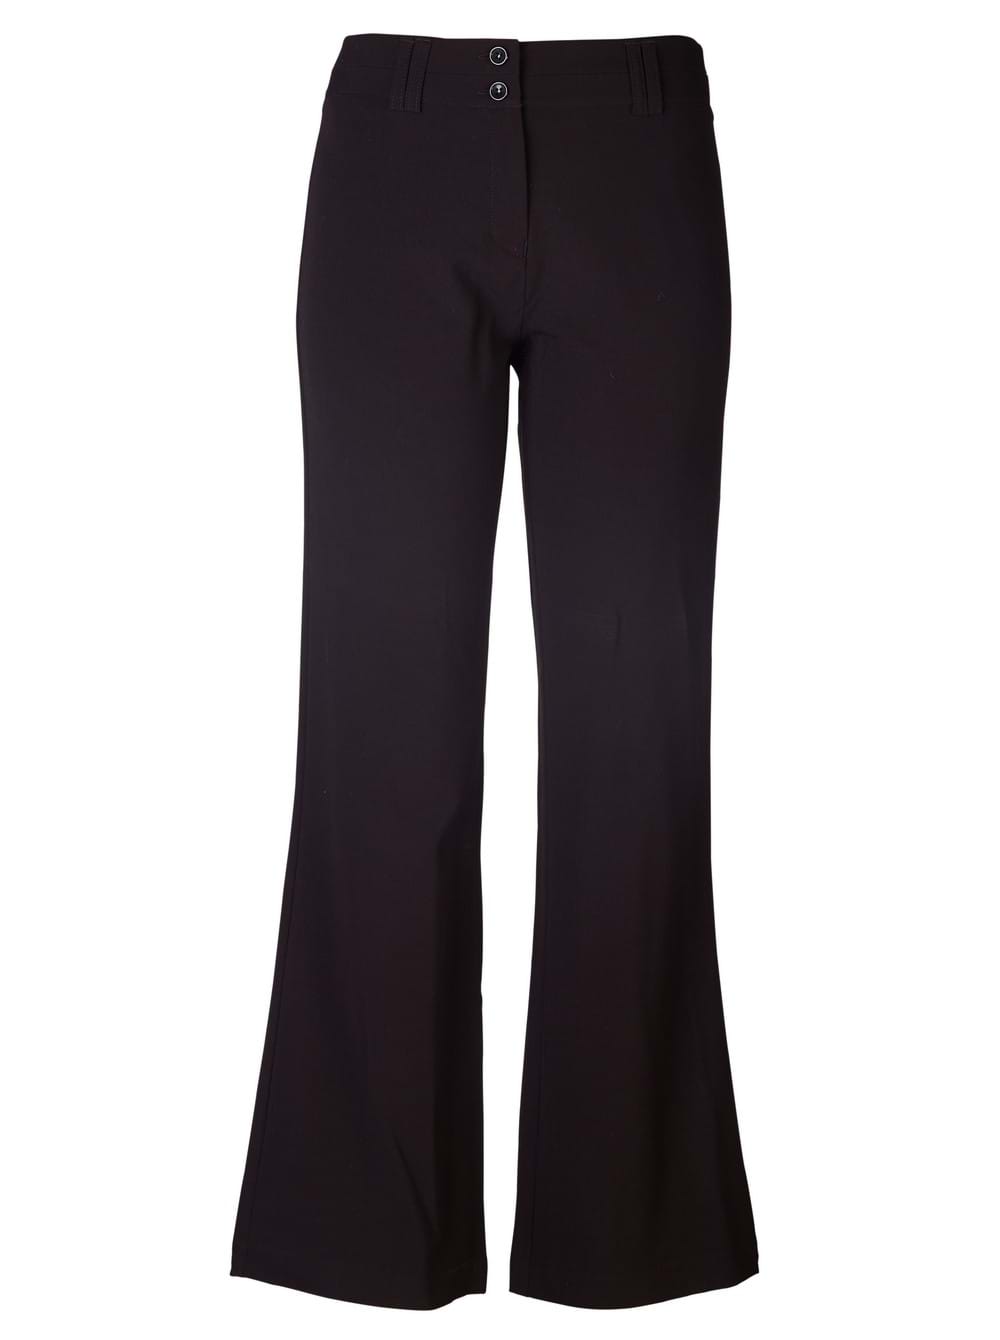 Litex woman´s hipster trousers in 3/4 length, grey, size M| ARTURE